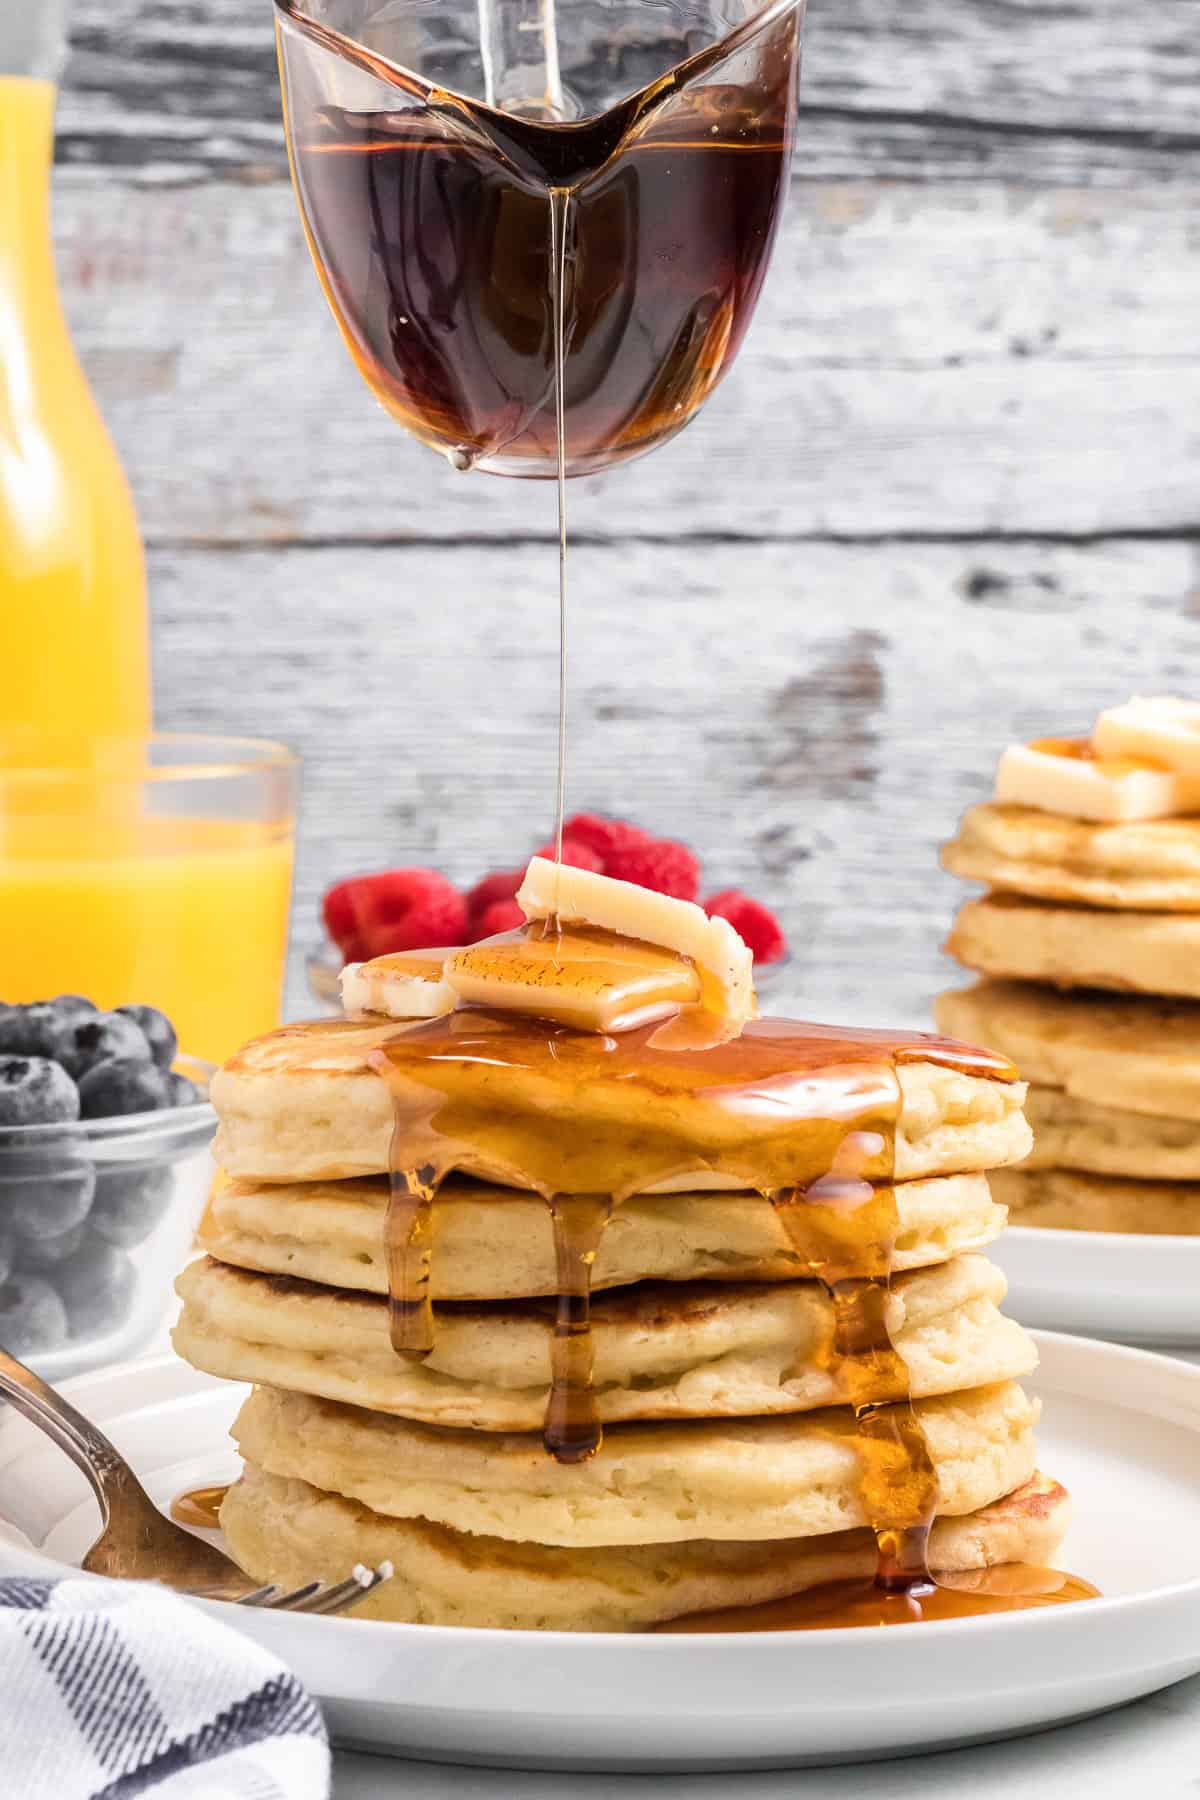 Pouring maple syrup onto a large stack of pancakes.